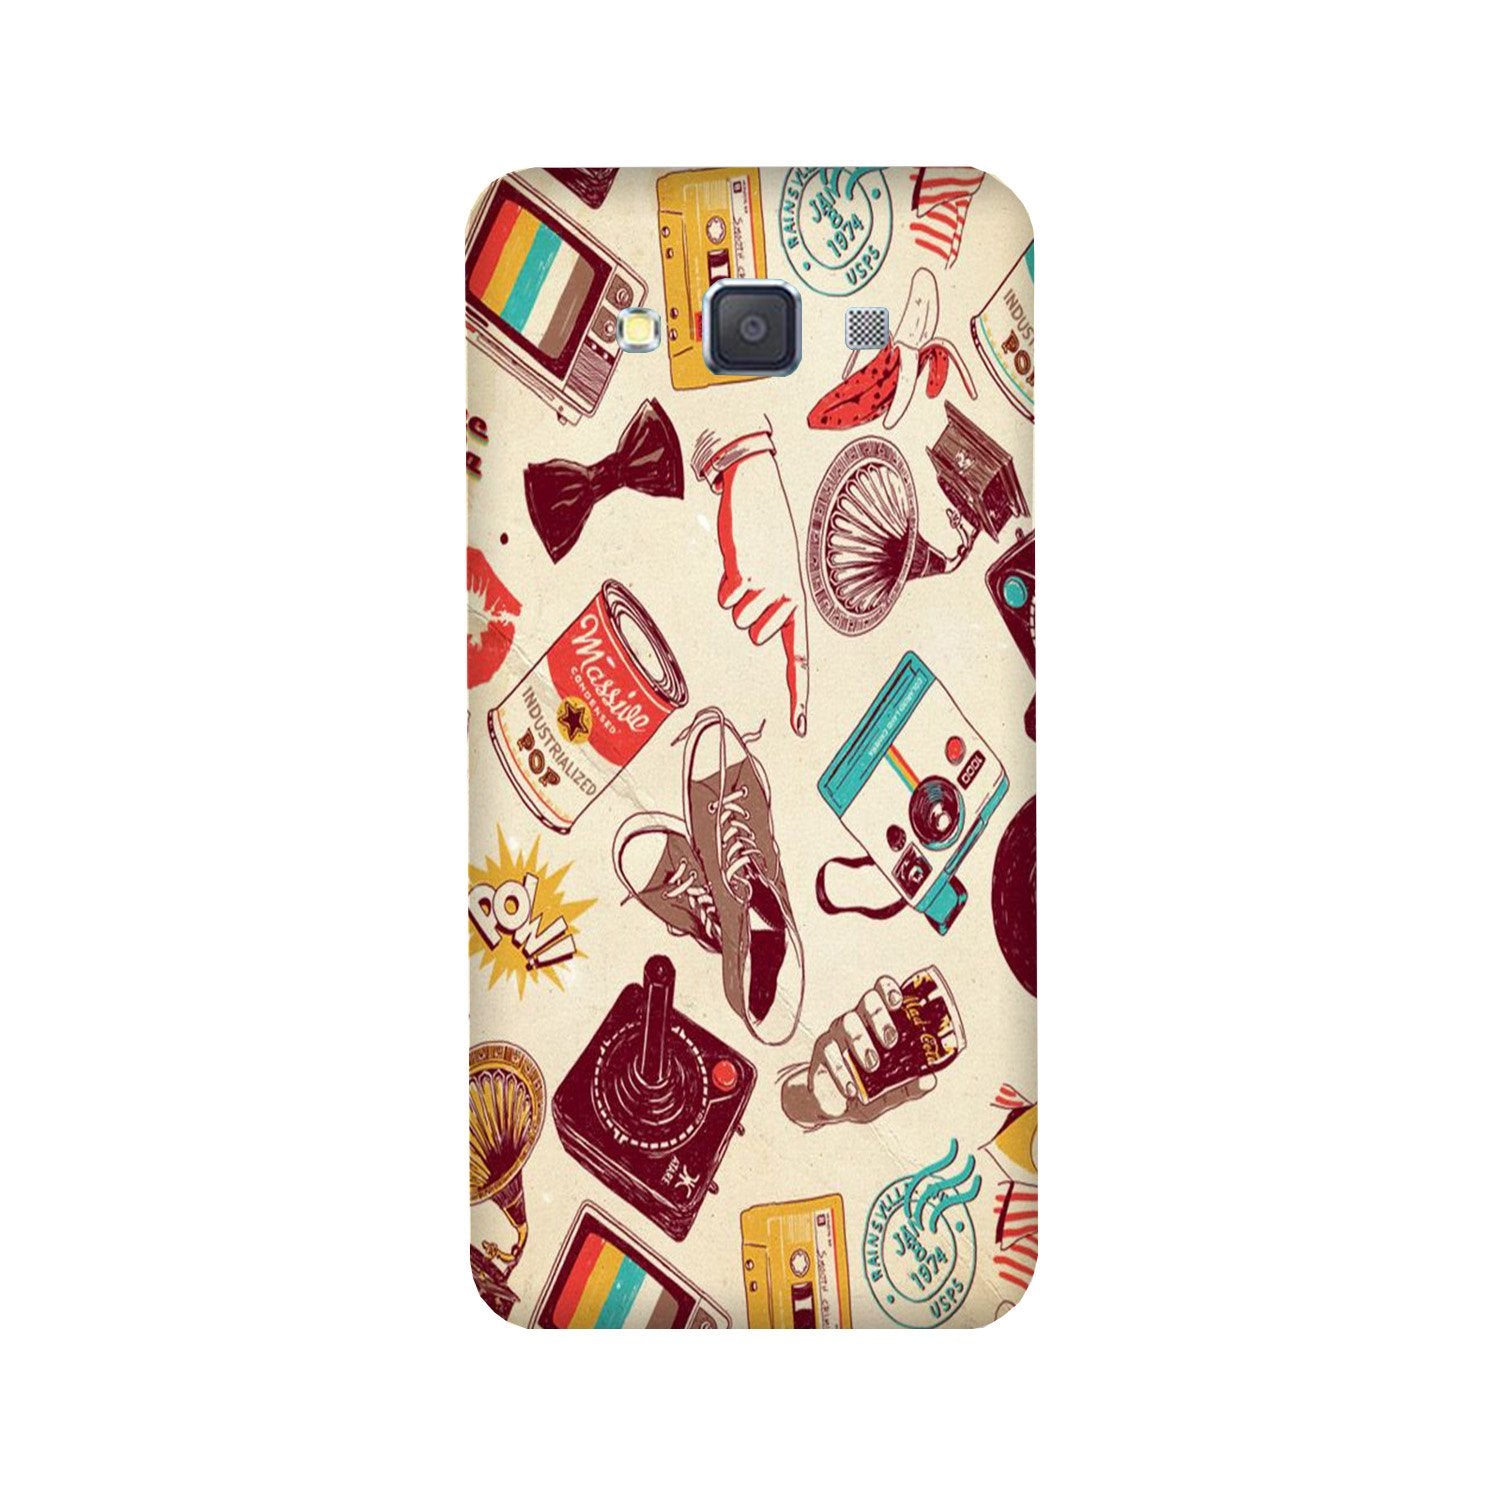 Vintage Case for Galaxy A3 (2015)